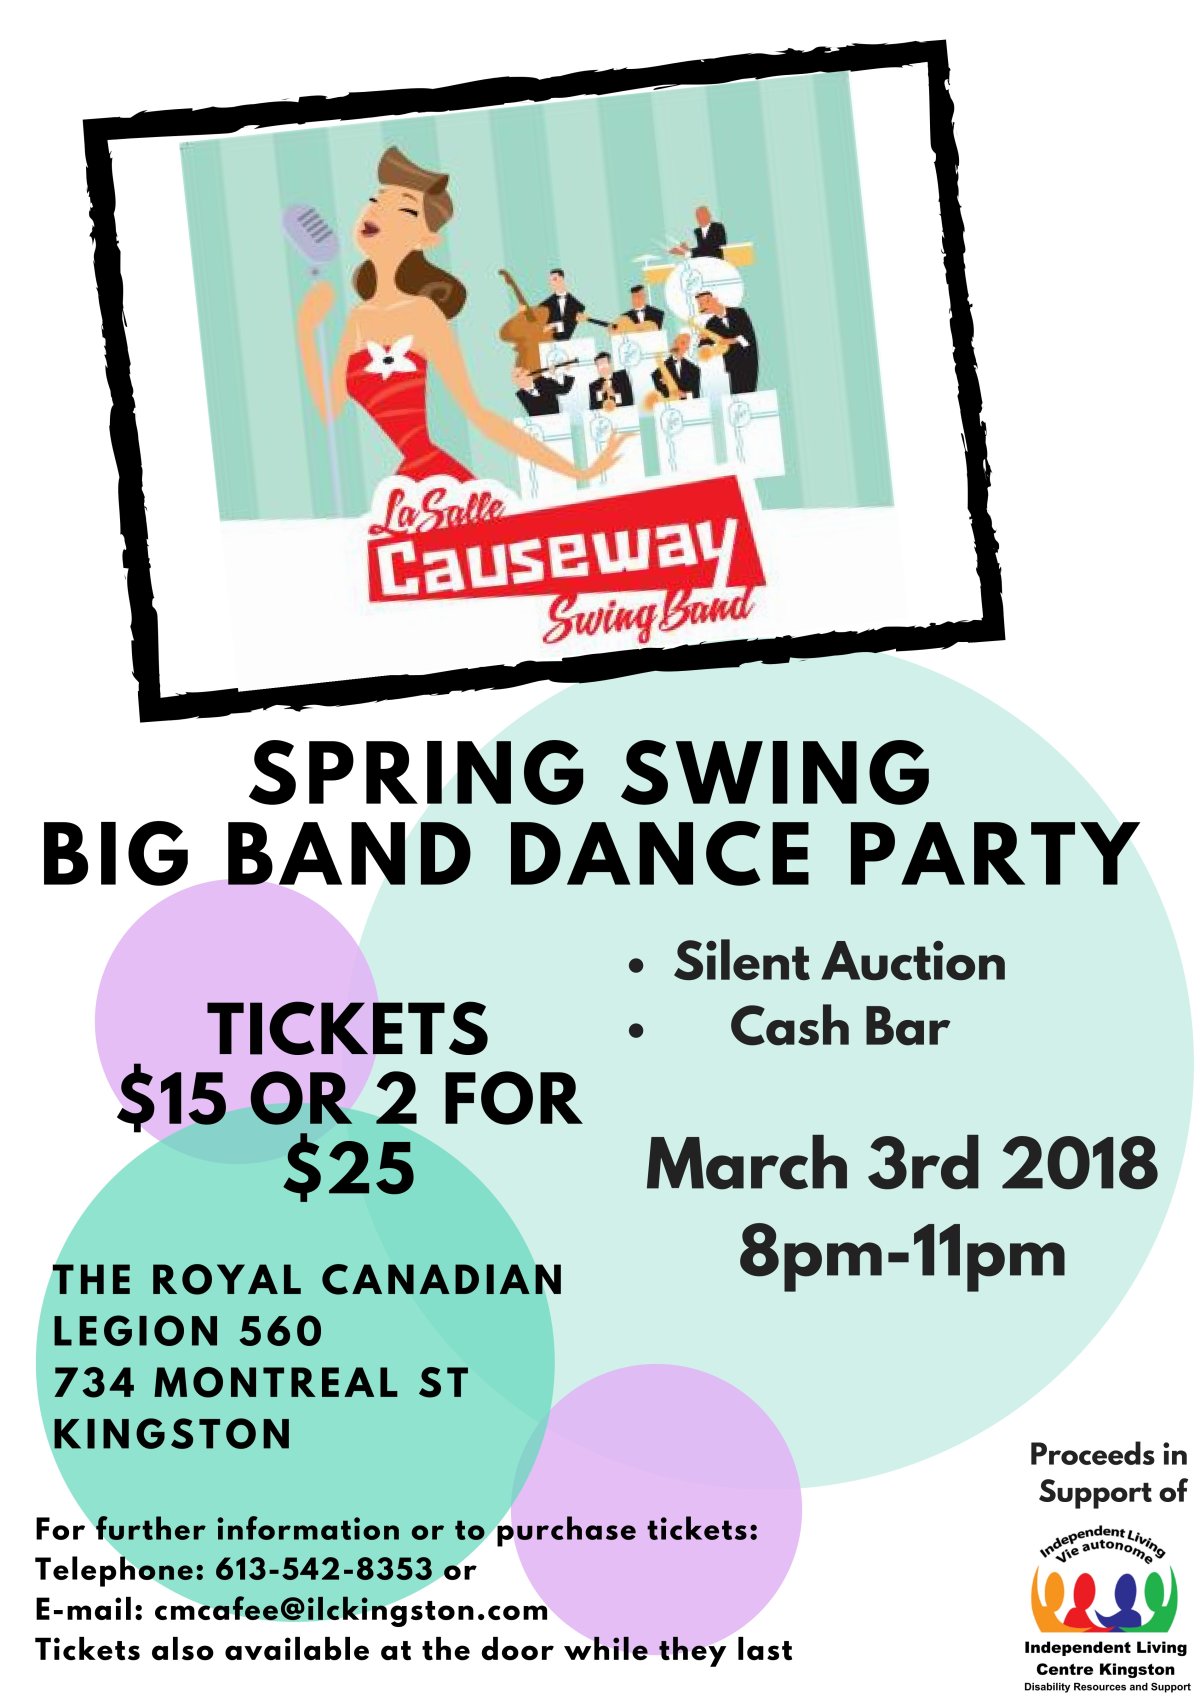 Spring Swing Big Band Dance Party - image